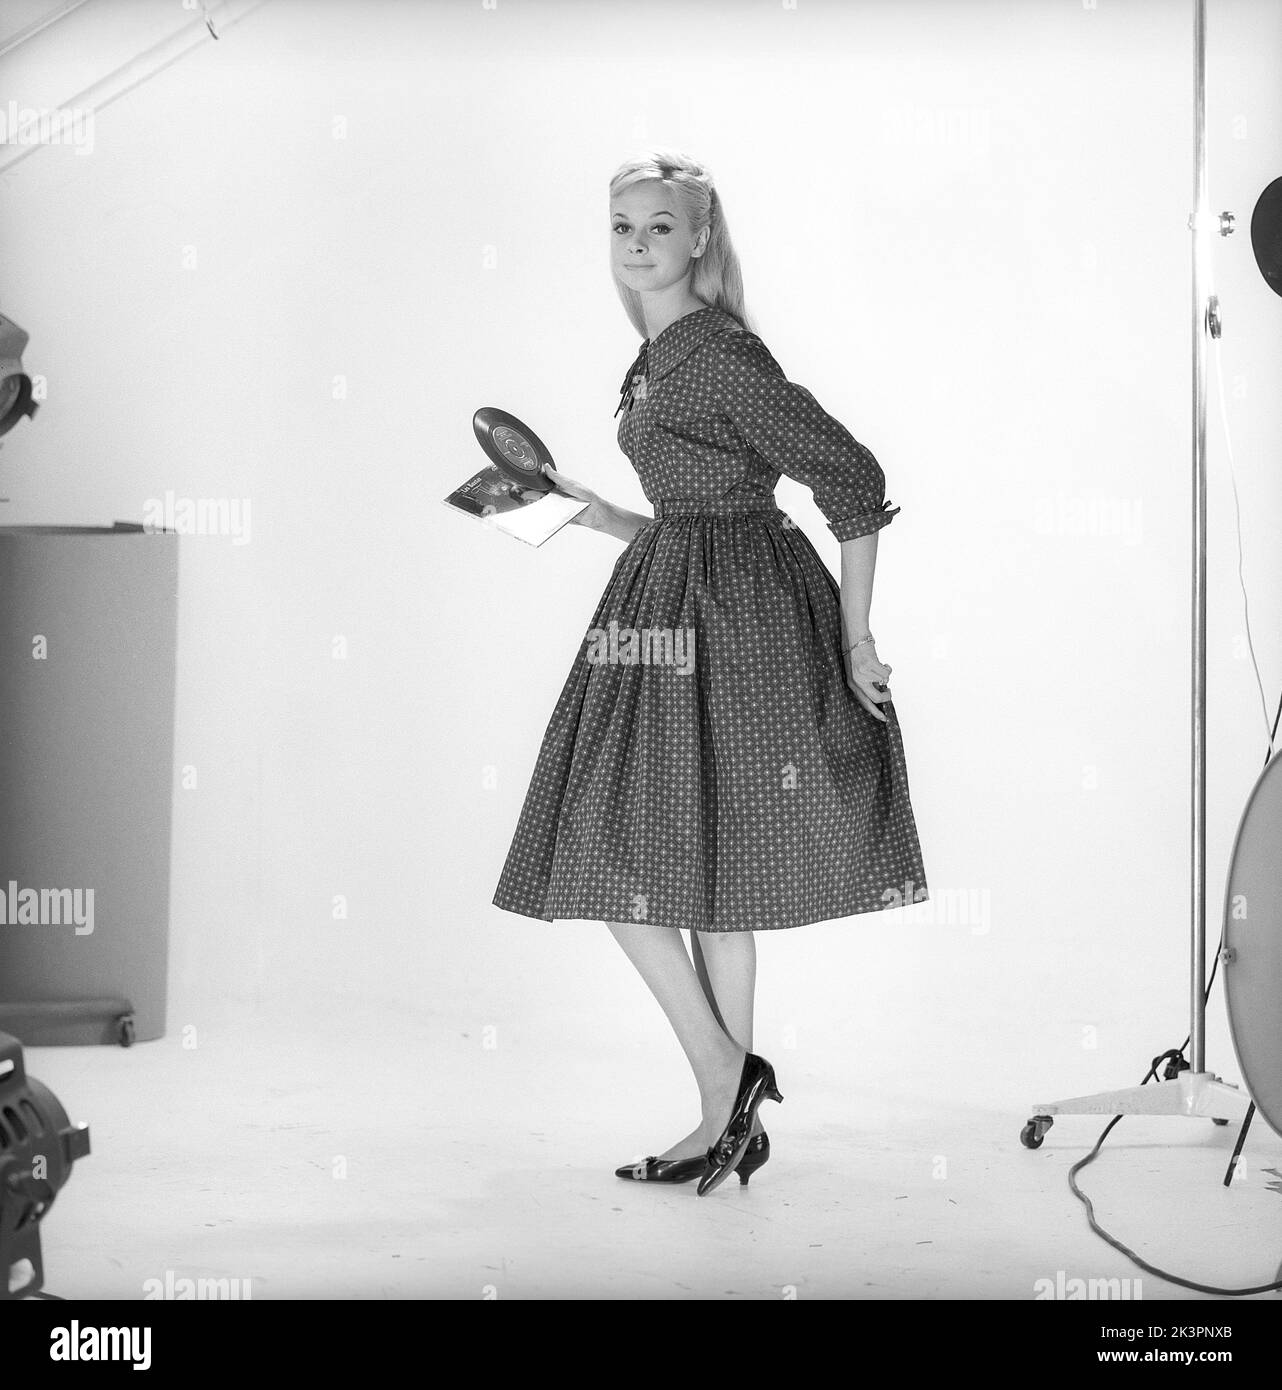 1950s fashion. A young woman in a typical 1950s dress. A wide skirt dress with a 50s patterened fabric.  Sweden 1959. Kristoffersson ref CO93-10 Stock Photo